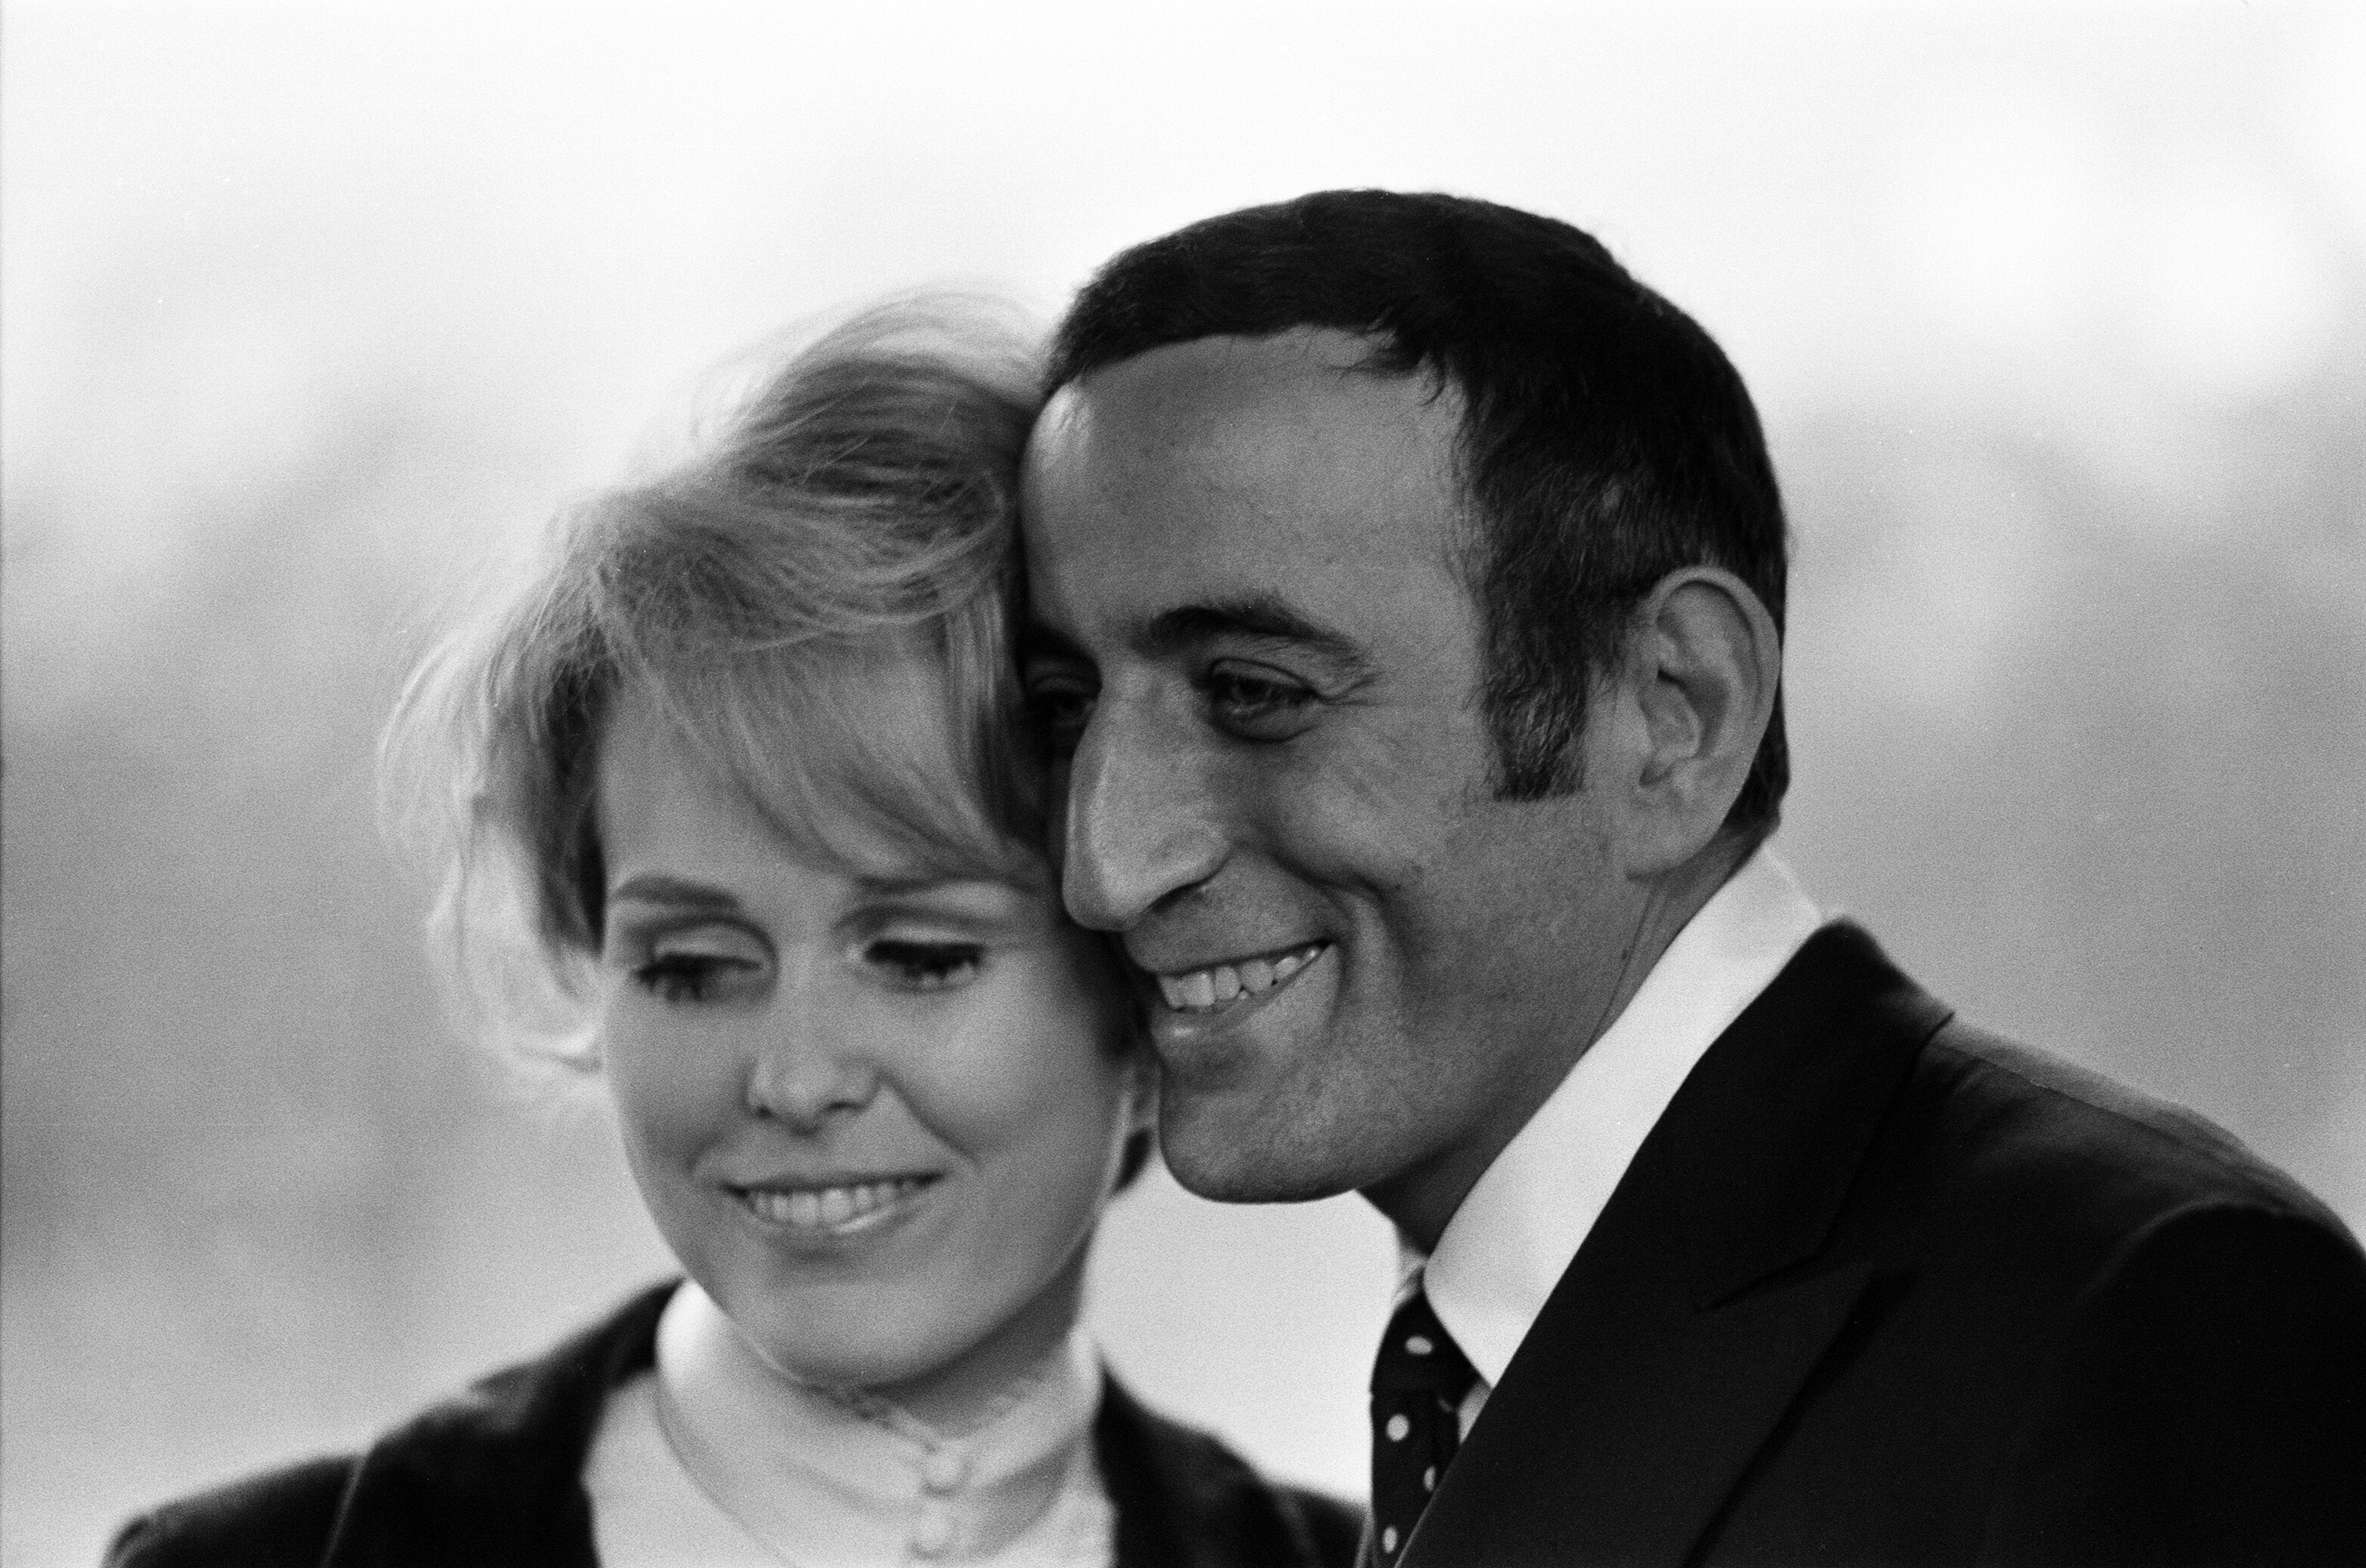 Sandra Grant and Tony Bennett on March 10, 1968, at the Hilton Hotel. | Source: Getty Images